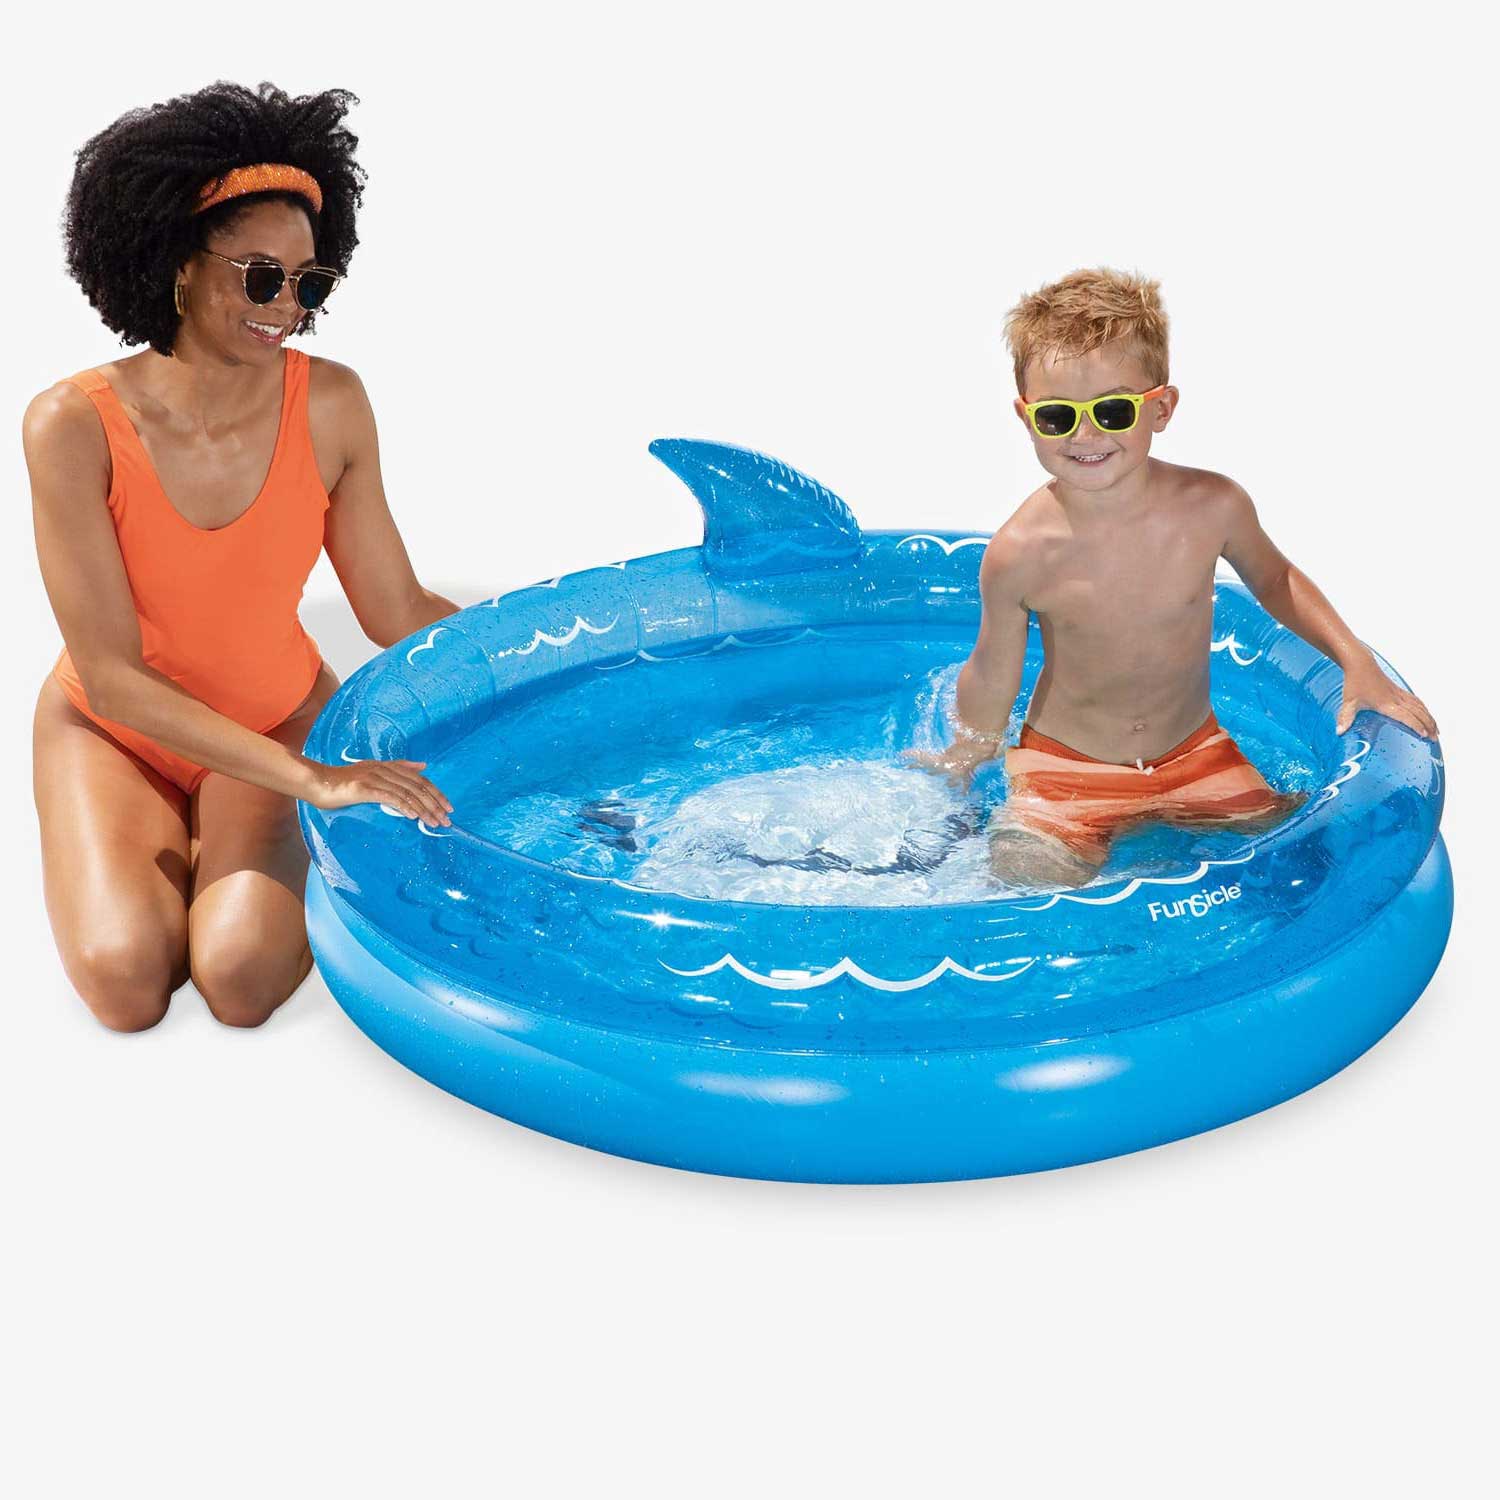 Funsicle Friendly Shark FunRing Pool with models